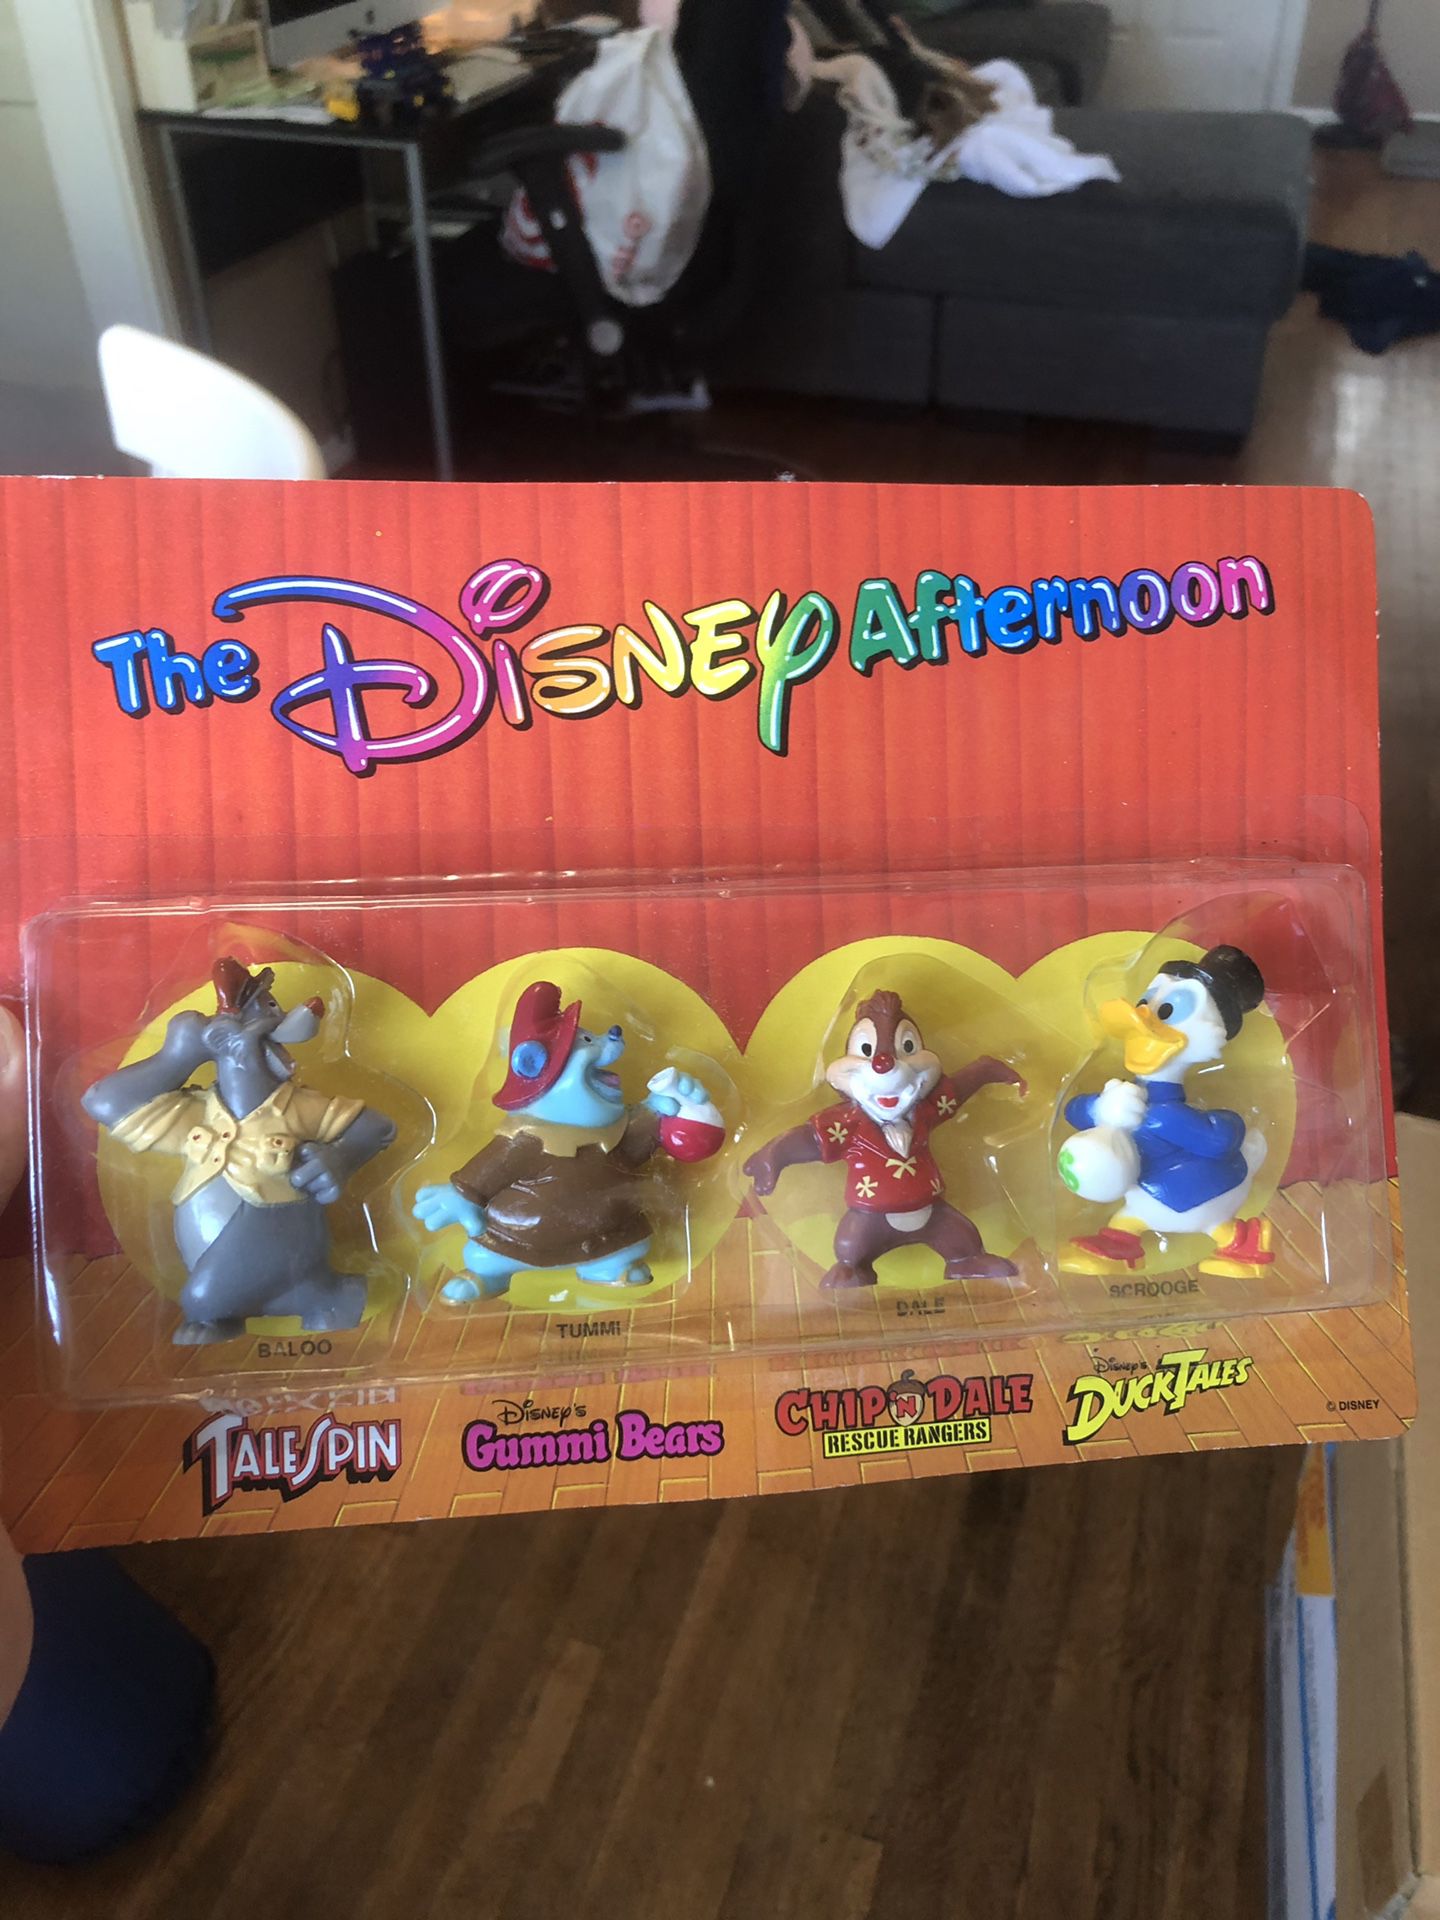 The Disney Afternoon Collection Kellogg’s toys